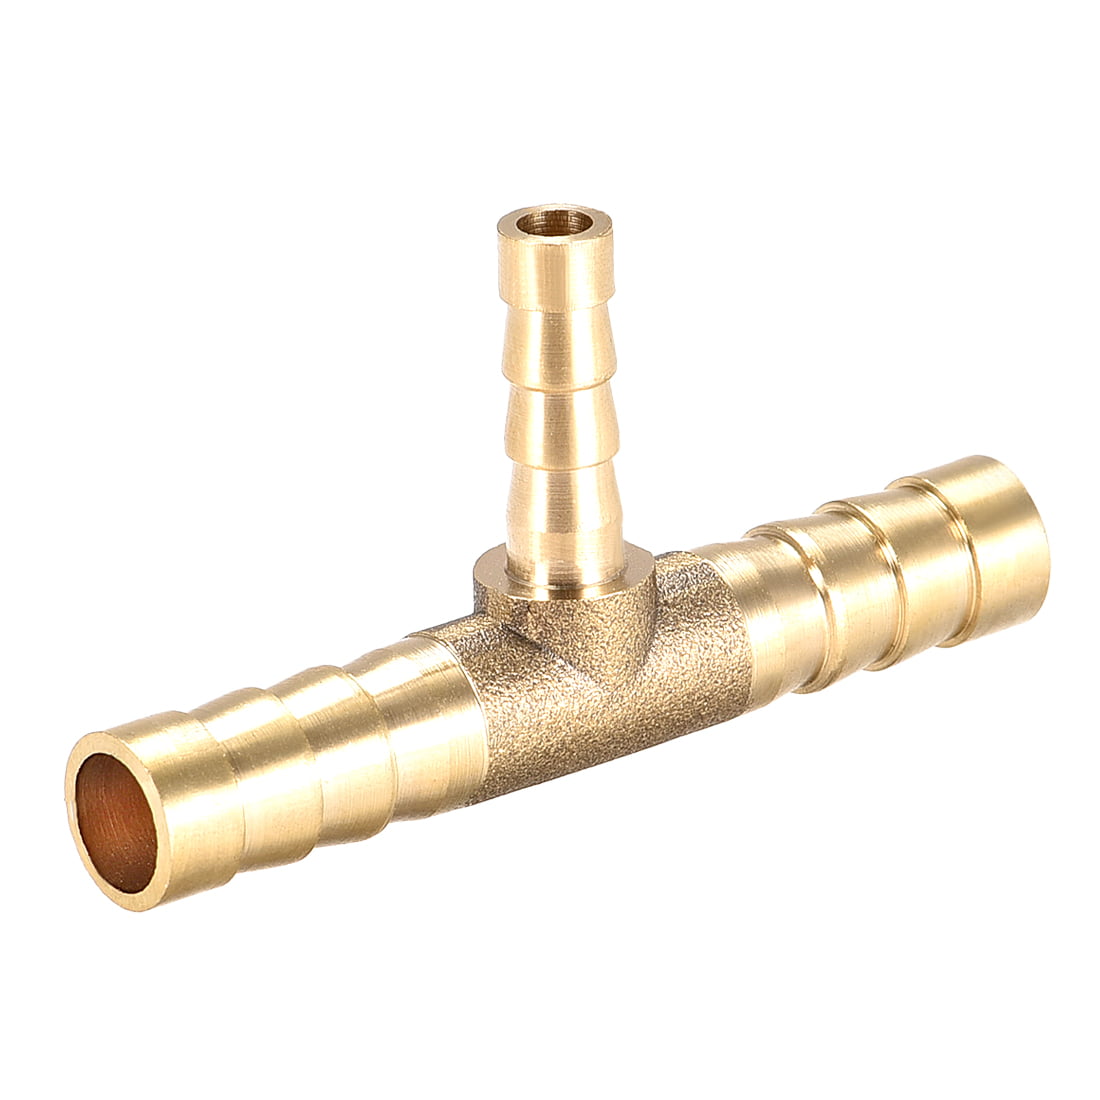 BARBED HOSE PIPE CONNECTOR JOINER REDUCER MANY SIZES 